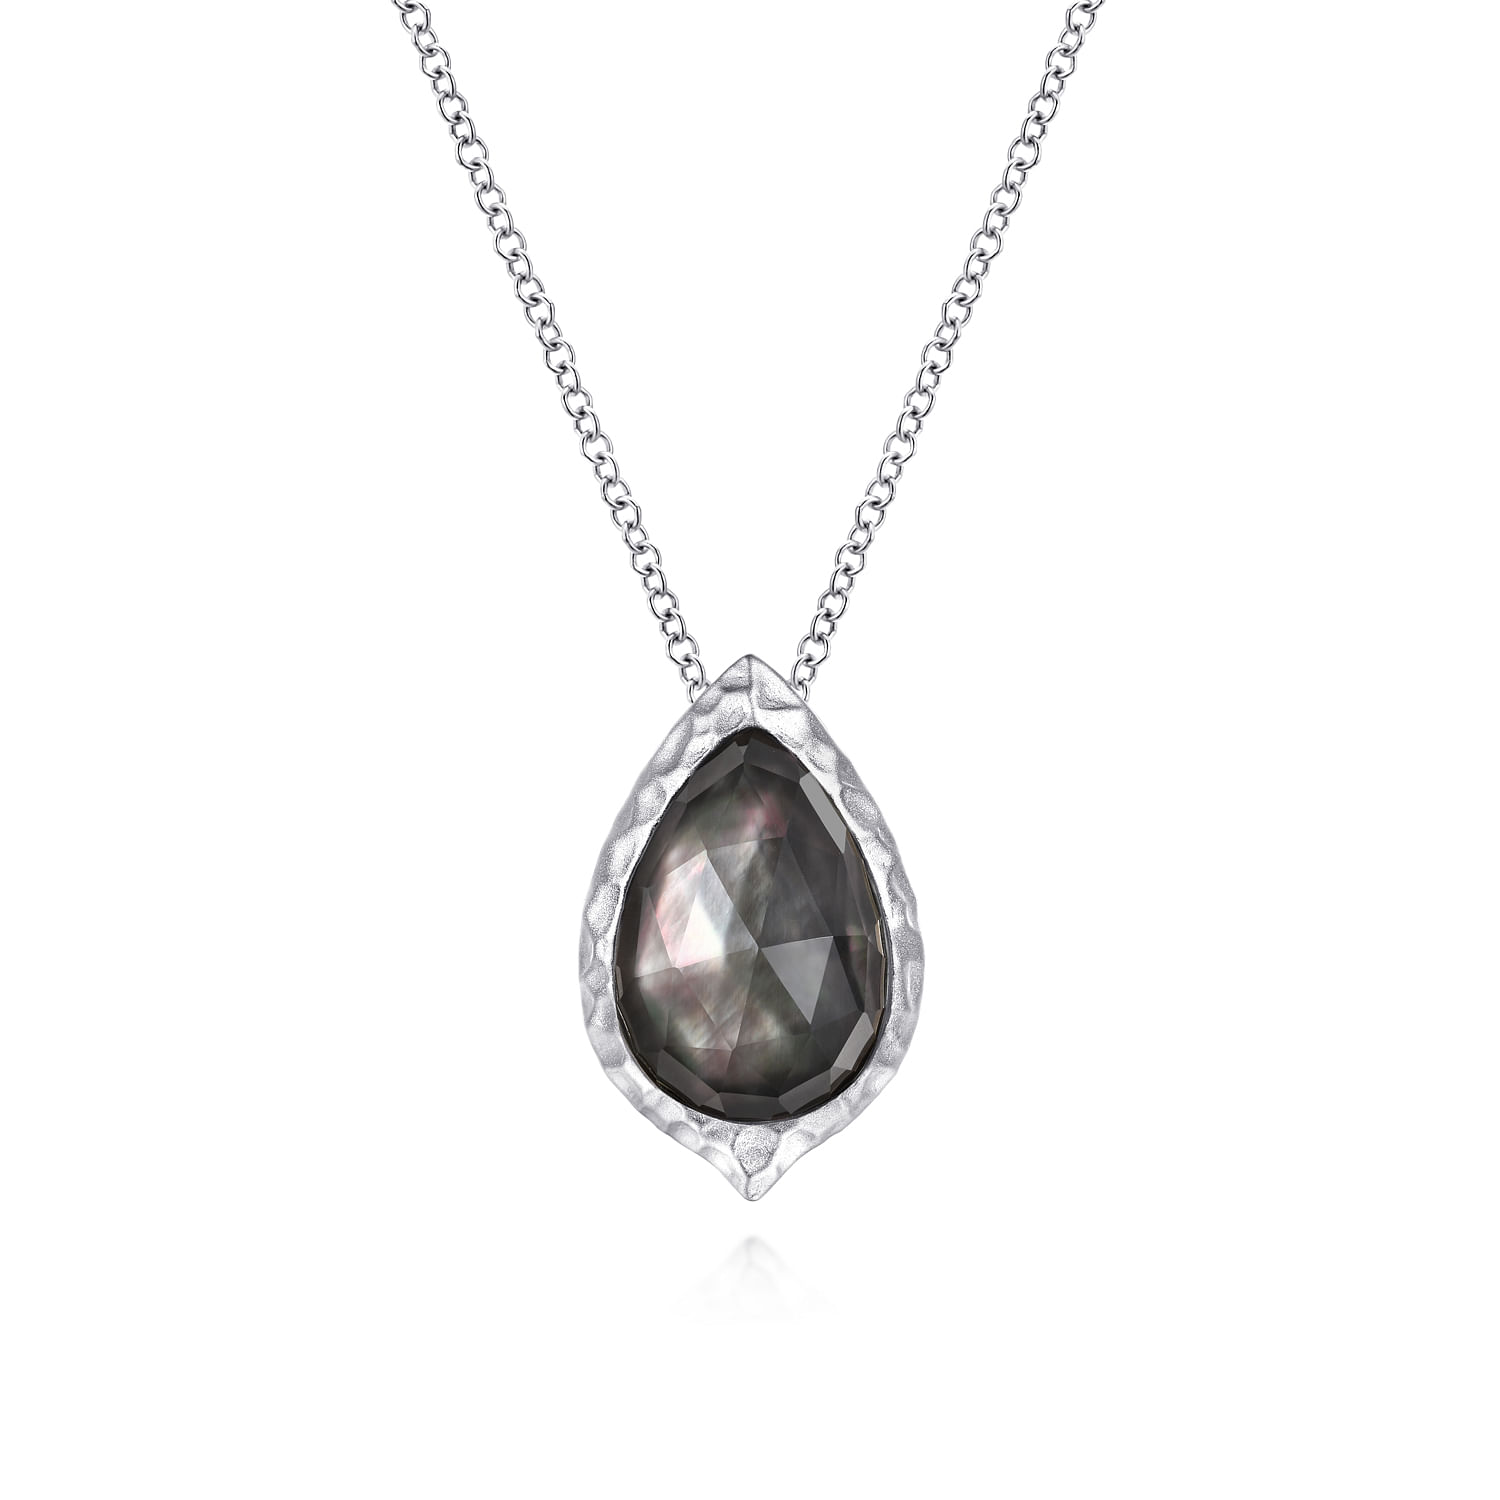 925 Sterling Silver Hammered Pear Shaped Rock Crystal/Black MOP Pendant Necklace